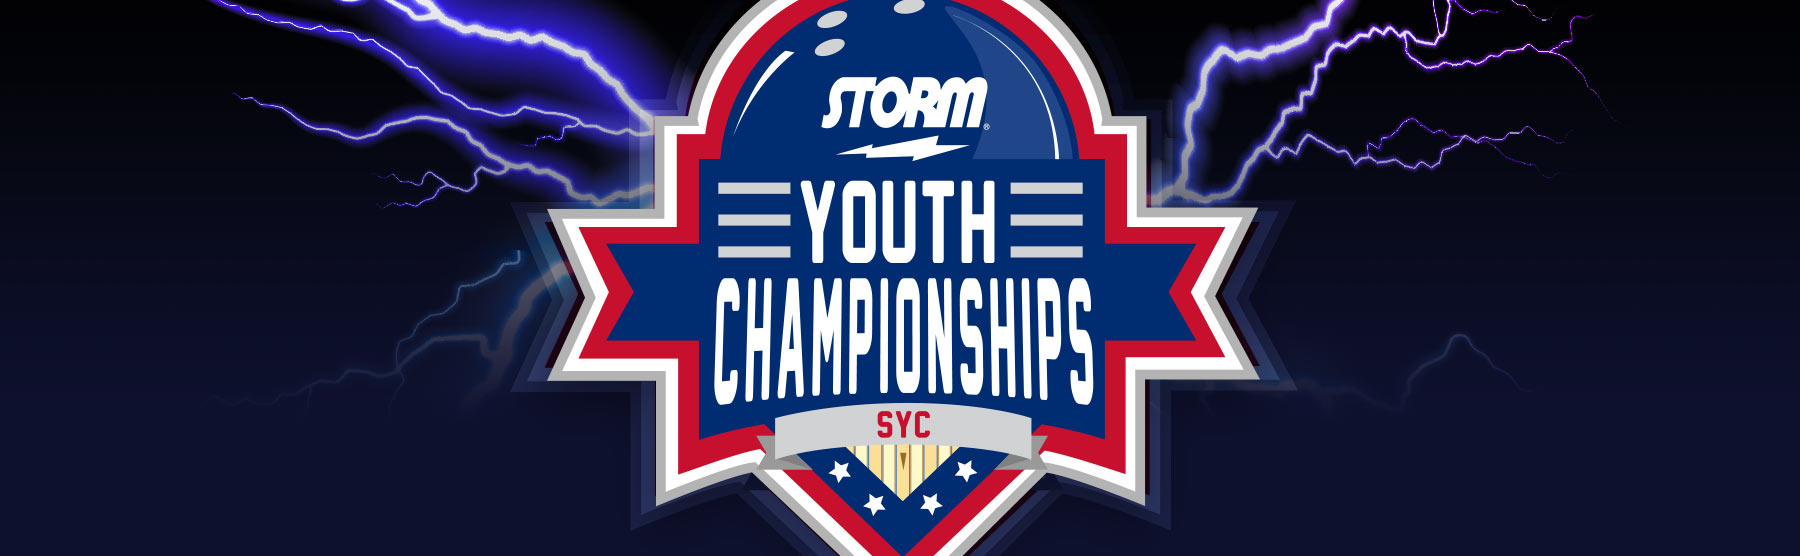 Storm Youth Championships